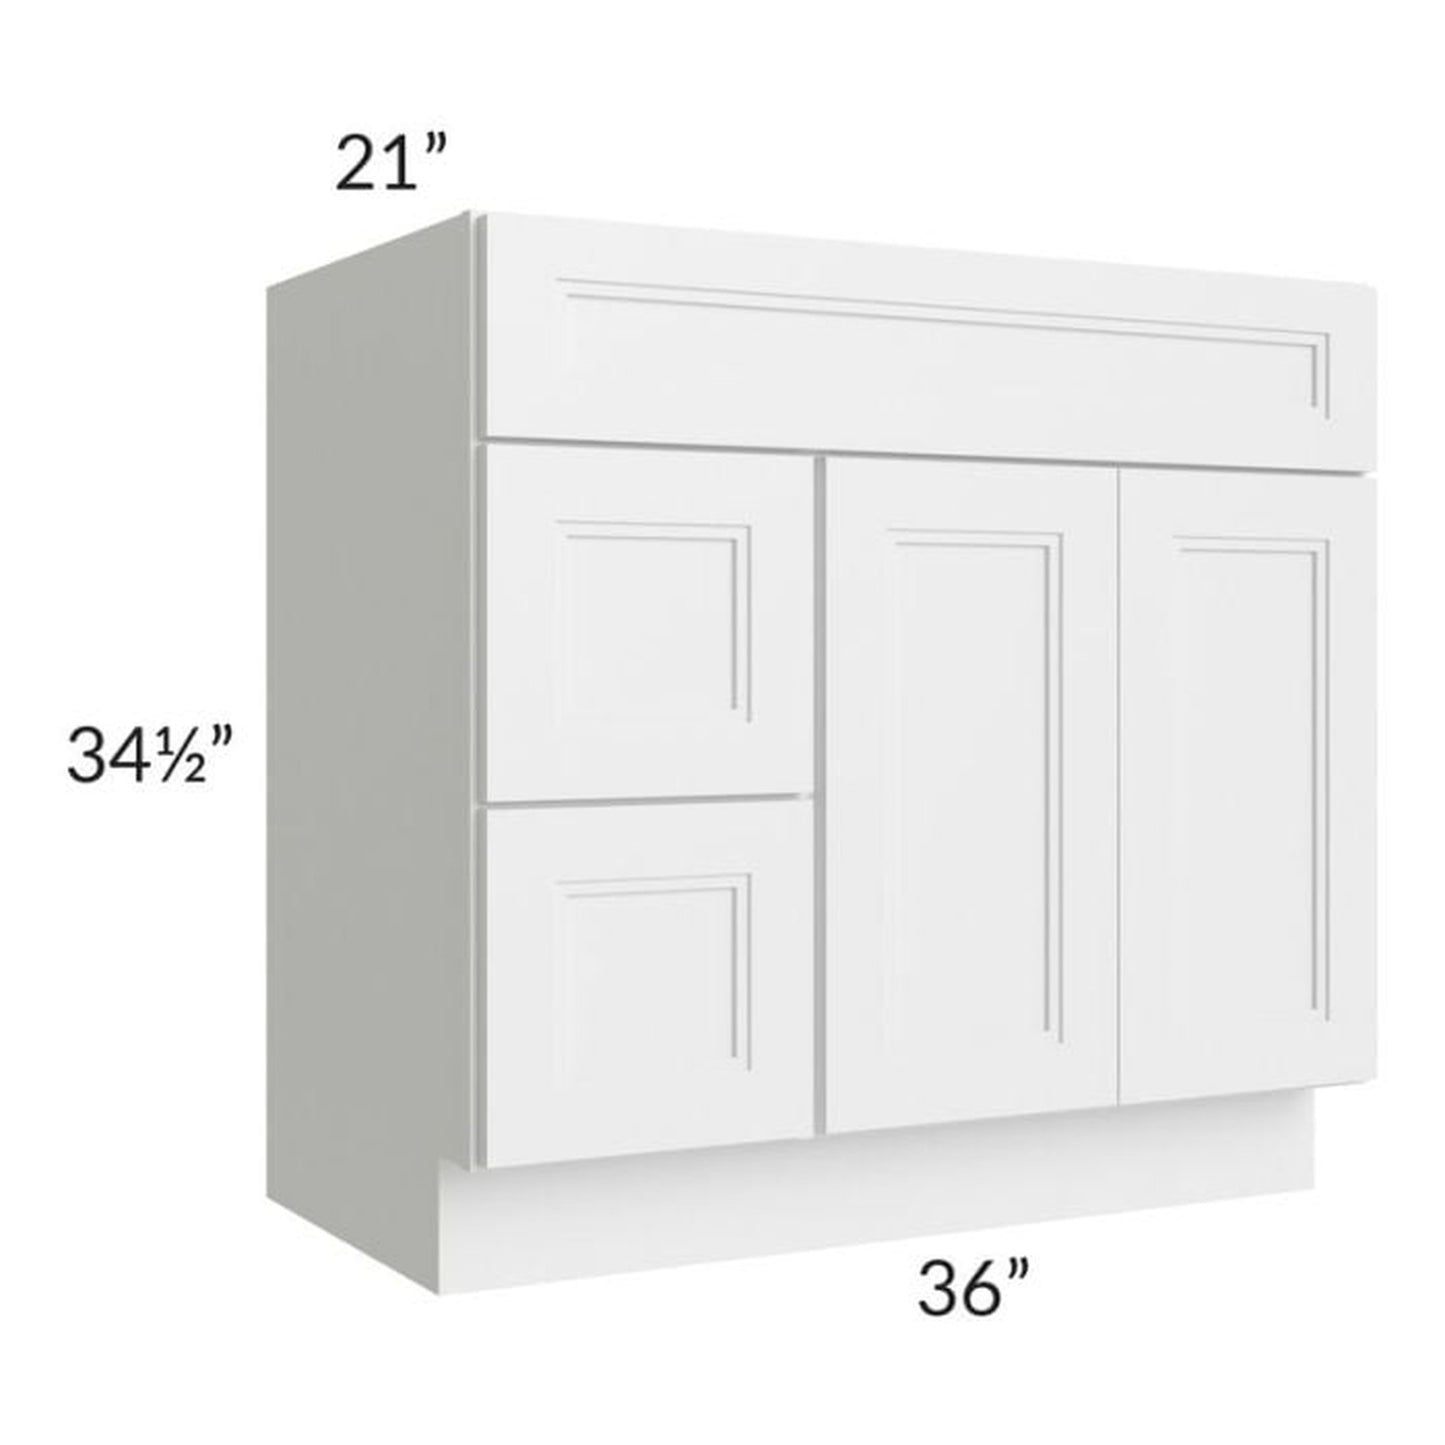 RTA Charlotte White 36" x 21" Vanity Sink Base Cabinet (Doors on Right) with 1 Decorative End Panel